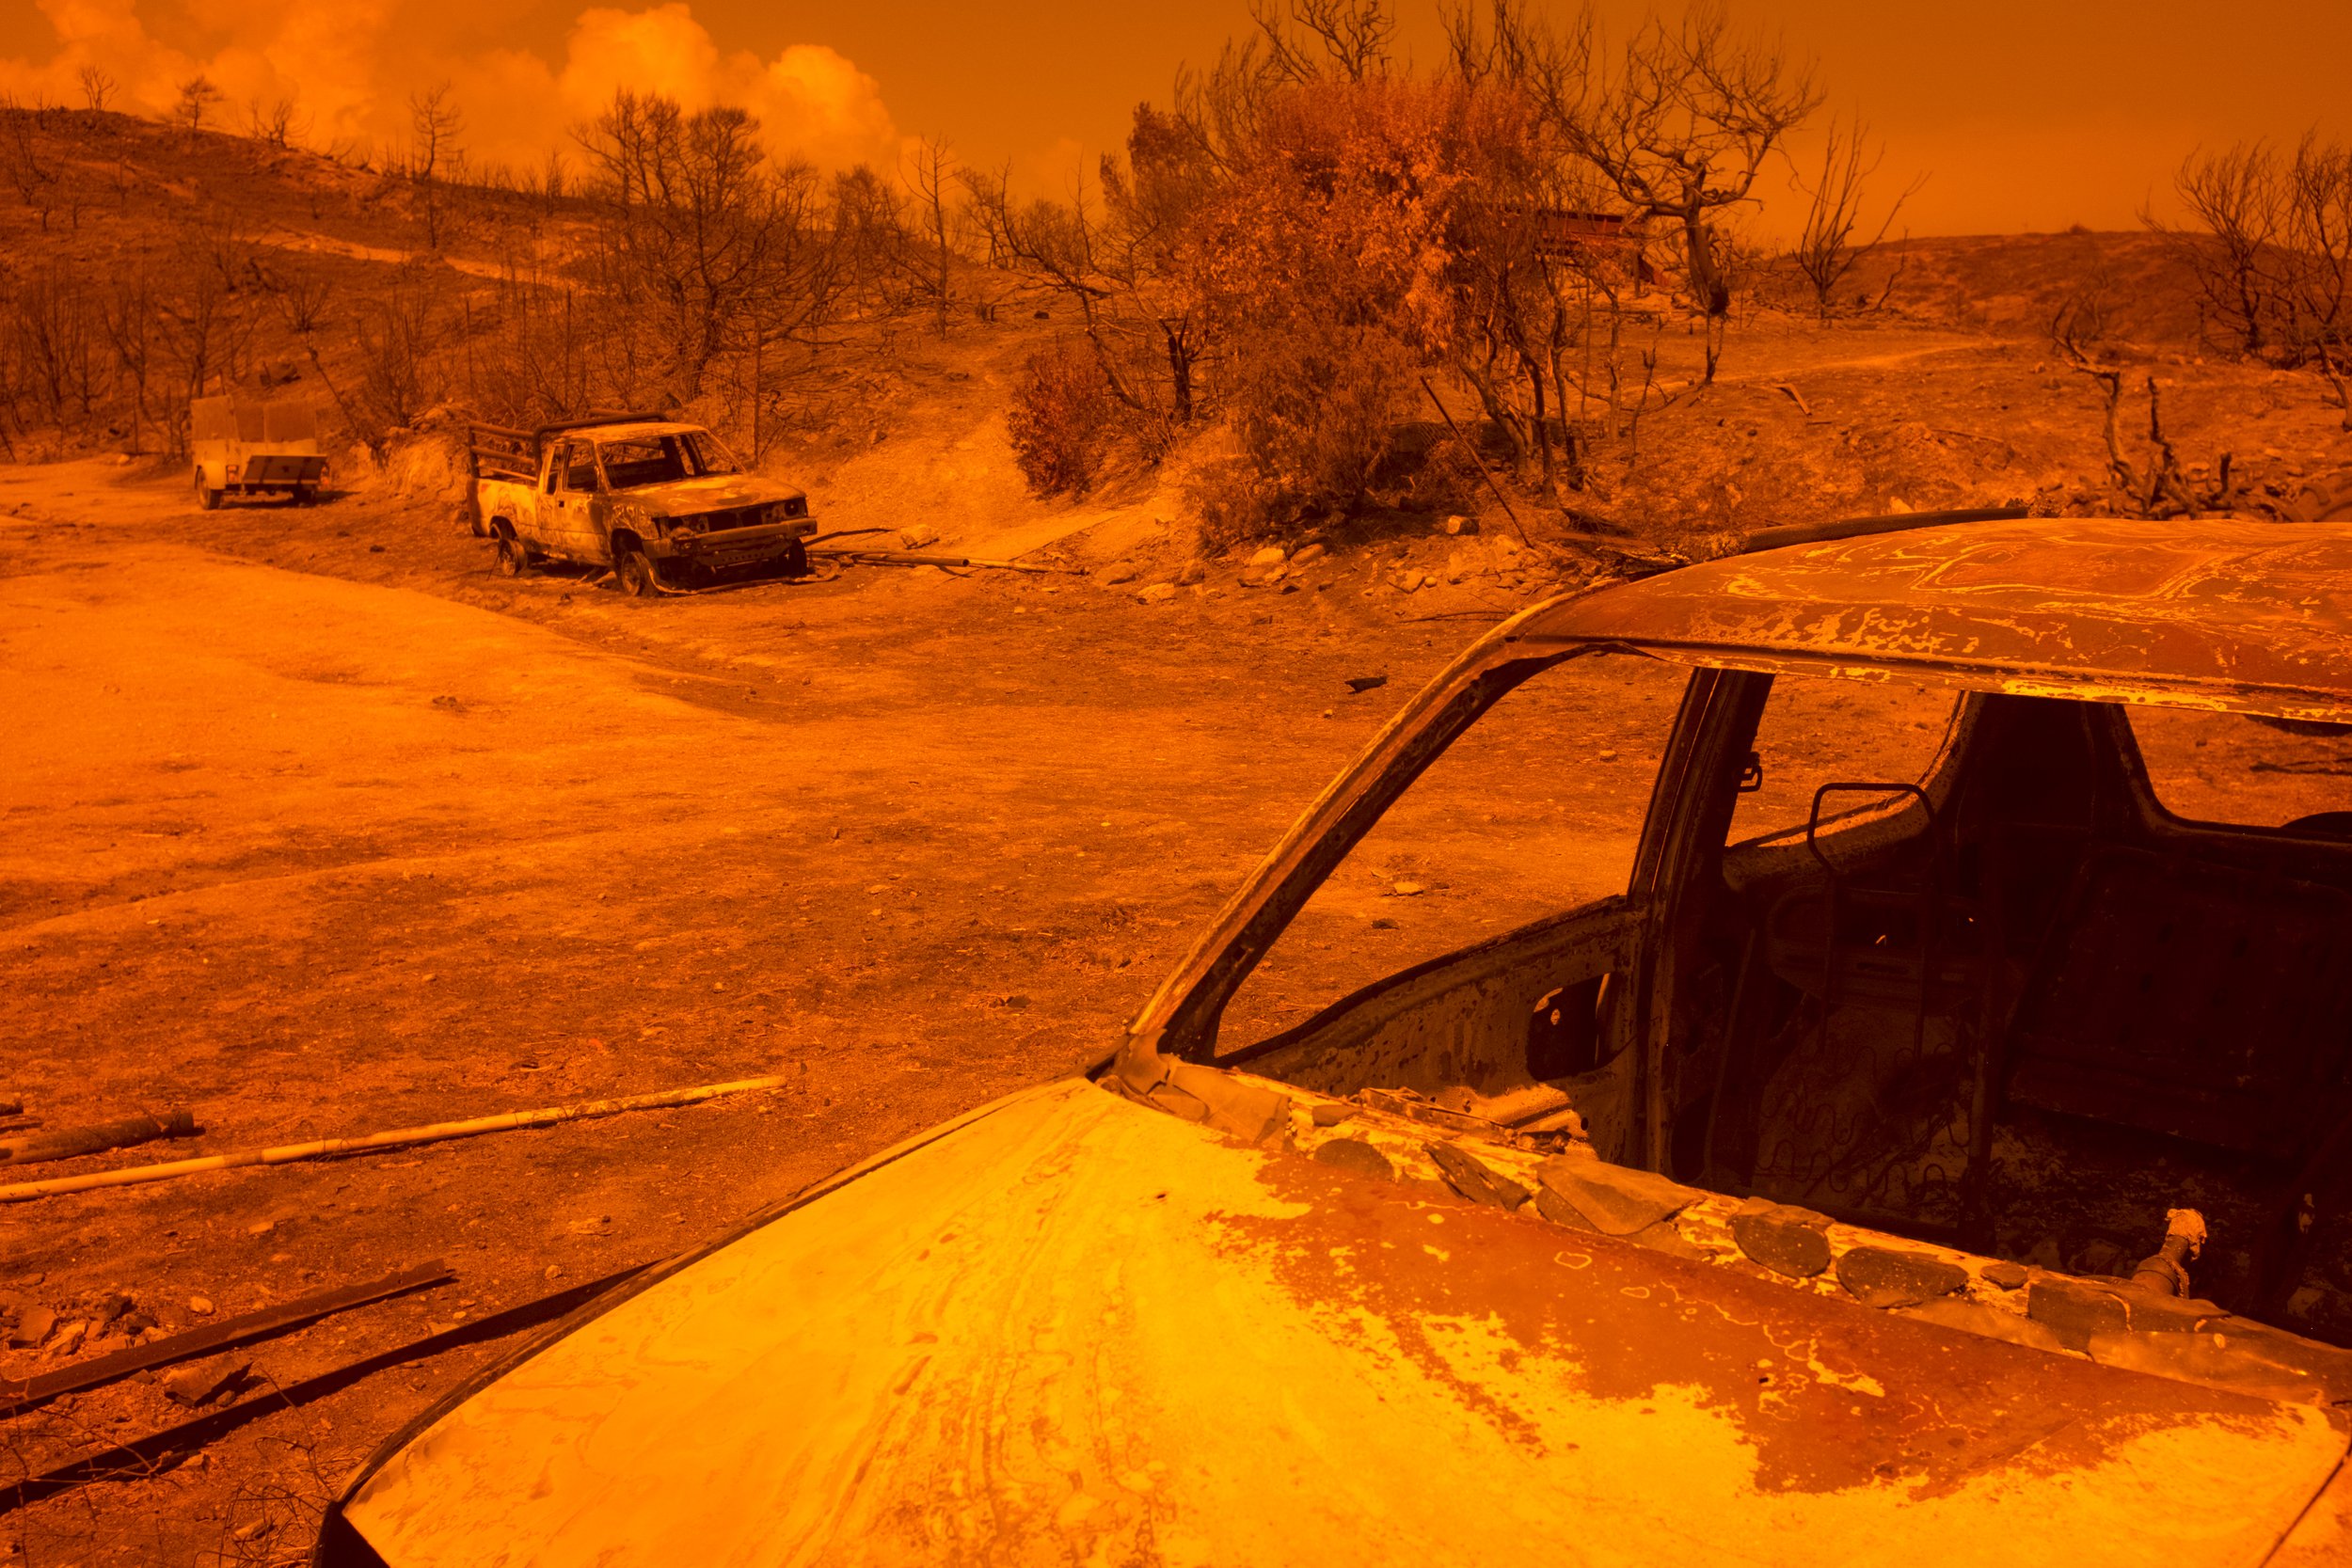  Burnt out cars after the wildfires on Rhodes 